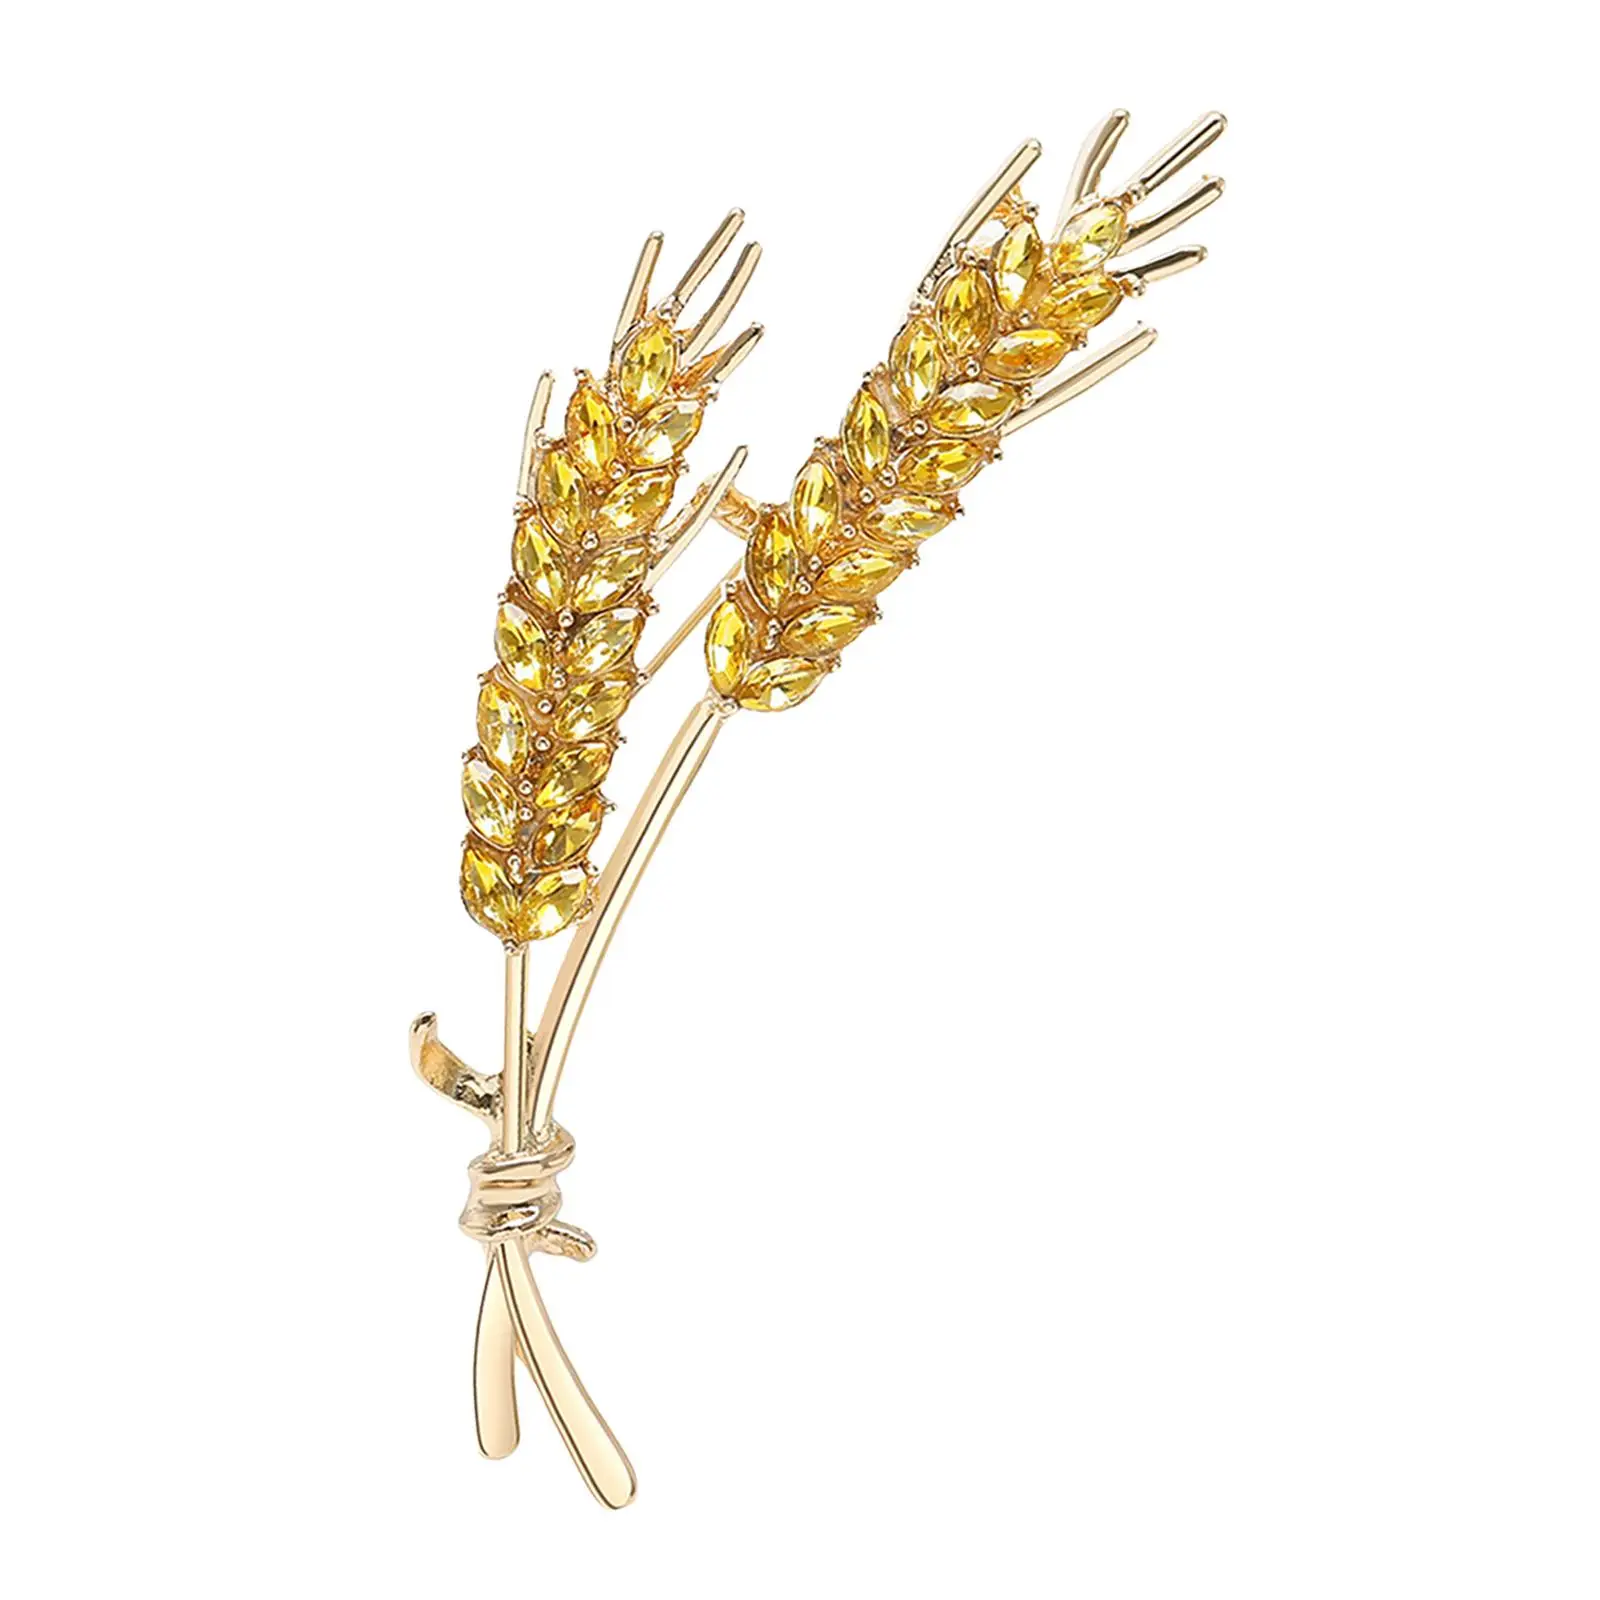 Wheat Brooch Pin Metal Ladies Bouquet Pins Decor Rhinestone Brooch Lapel Badge Womens Brooches for Wedding Prom Grandmother Gift